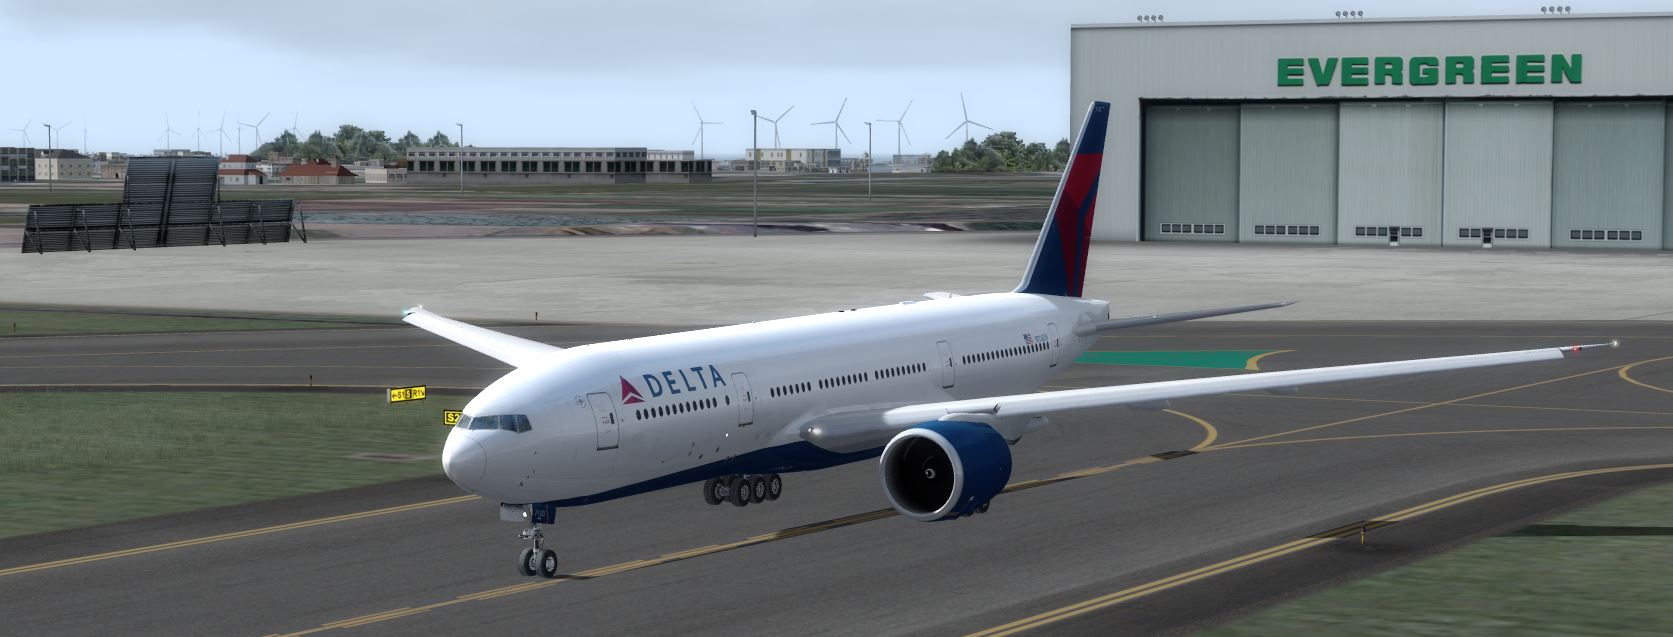 B777-200 Delta Airlines Standard Livery-1564 